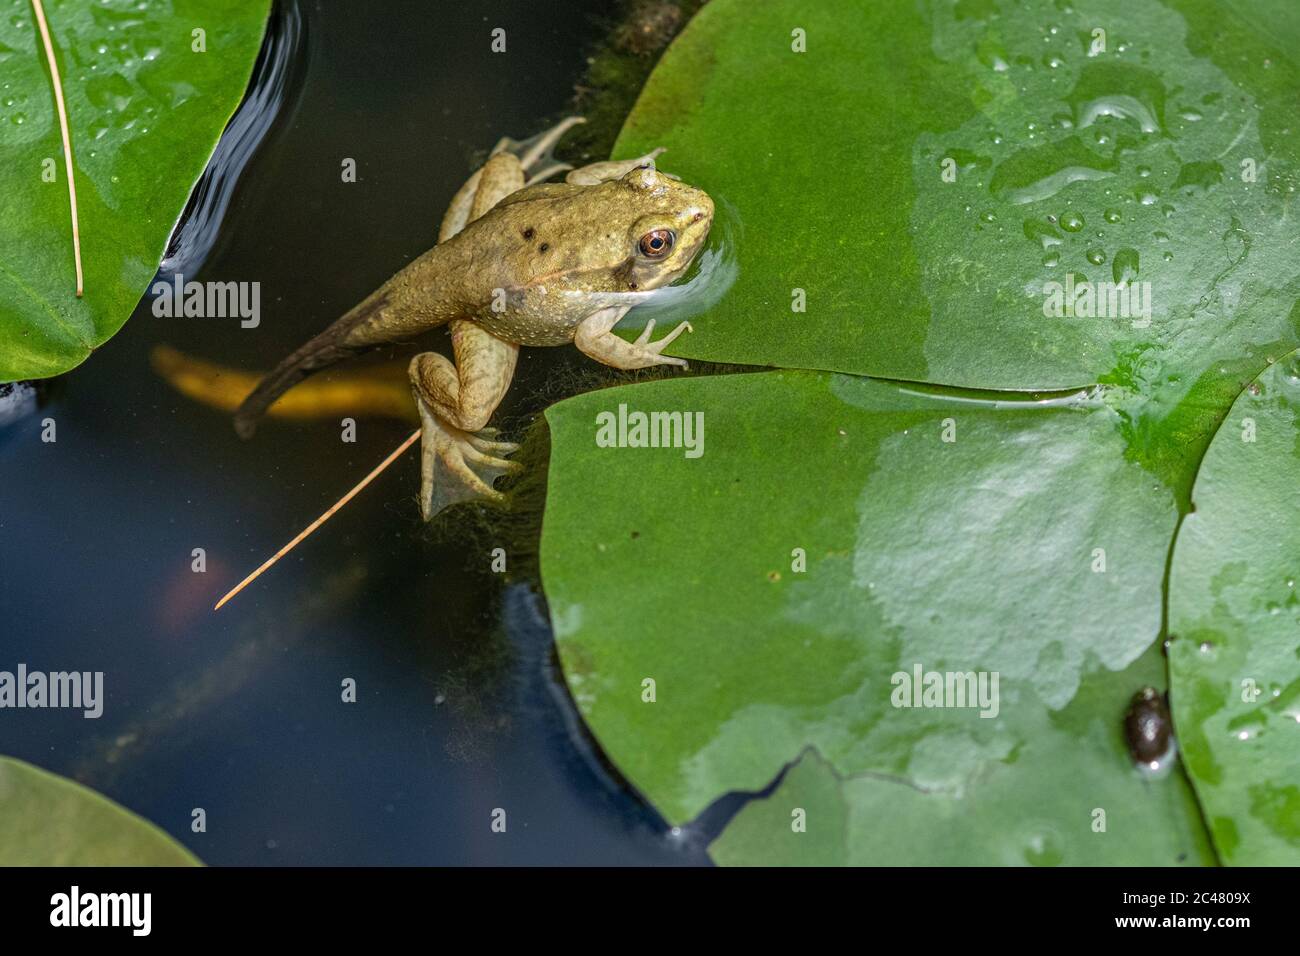 A green frog tadploe with legs and a tail Stock Photo